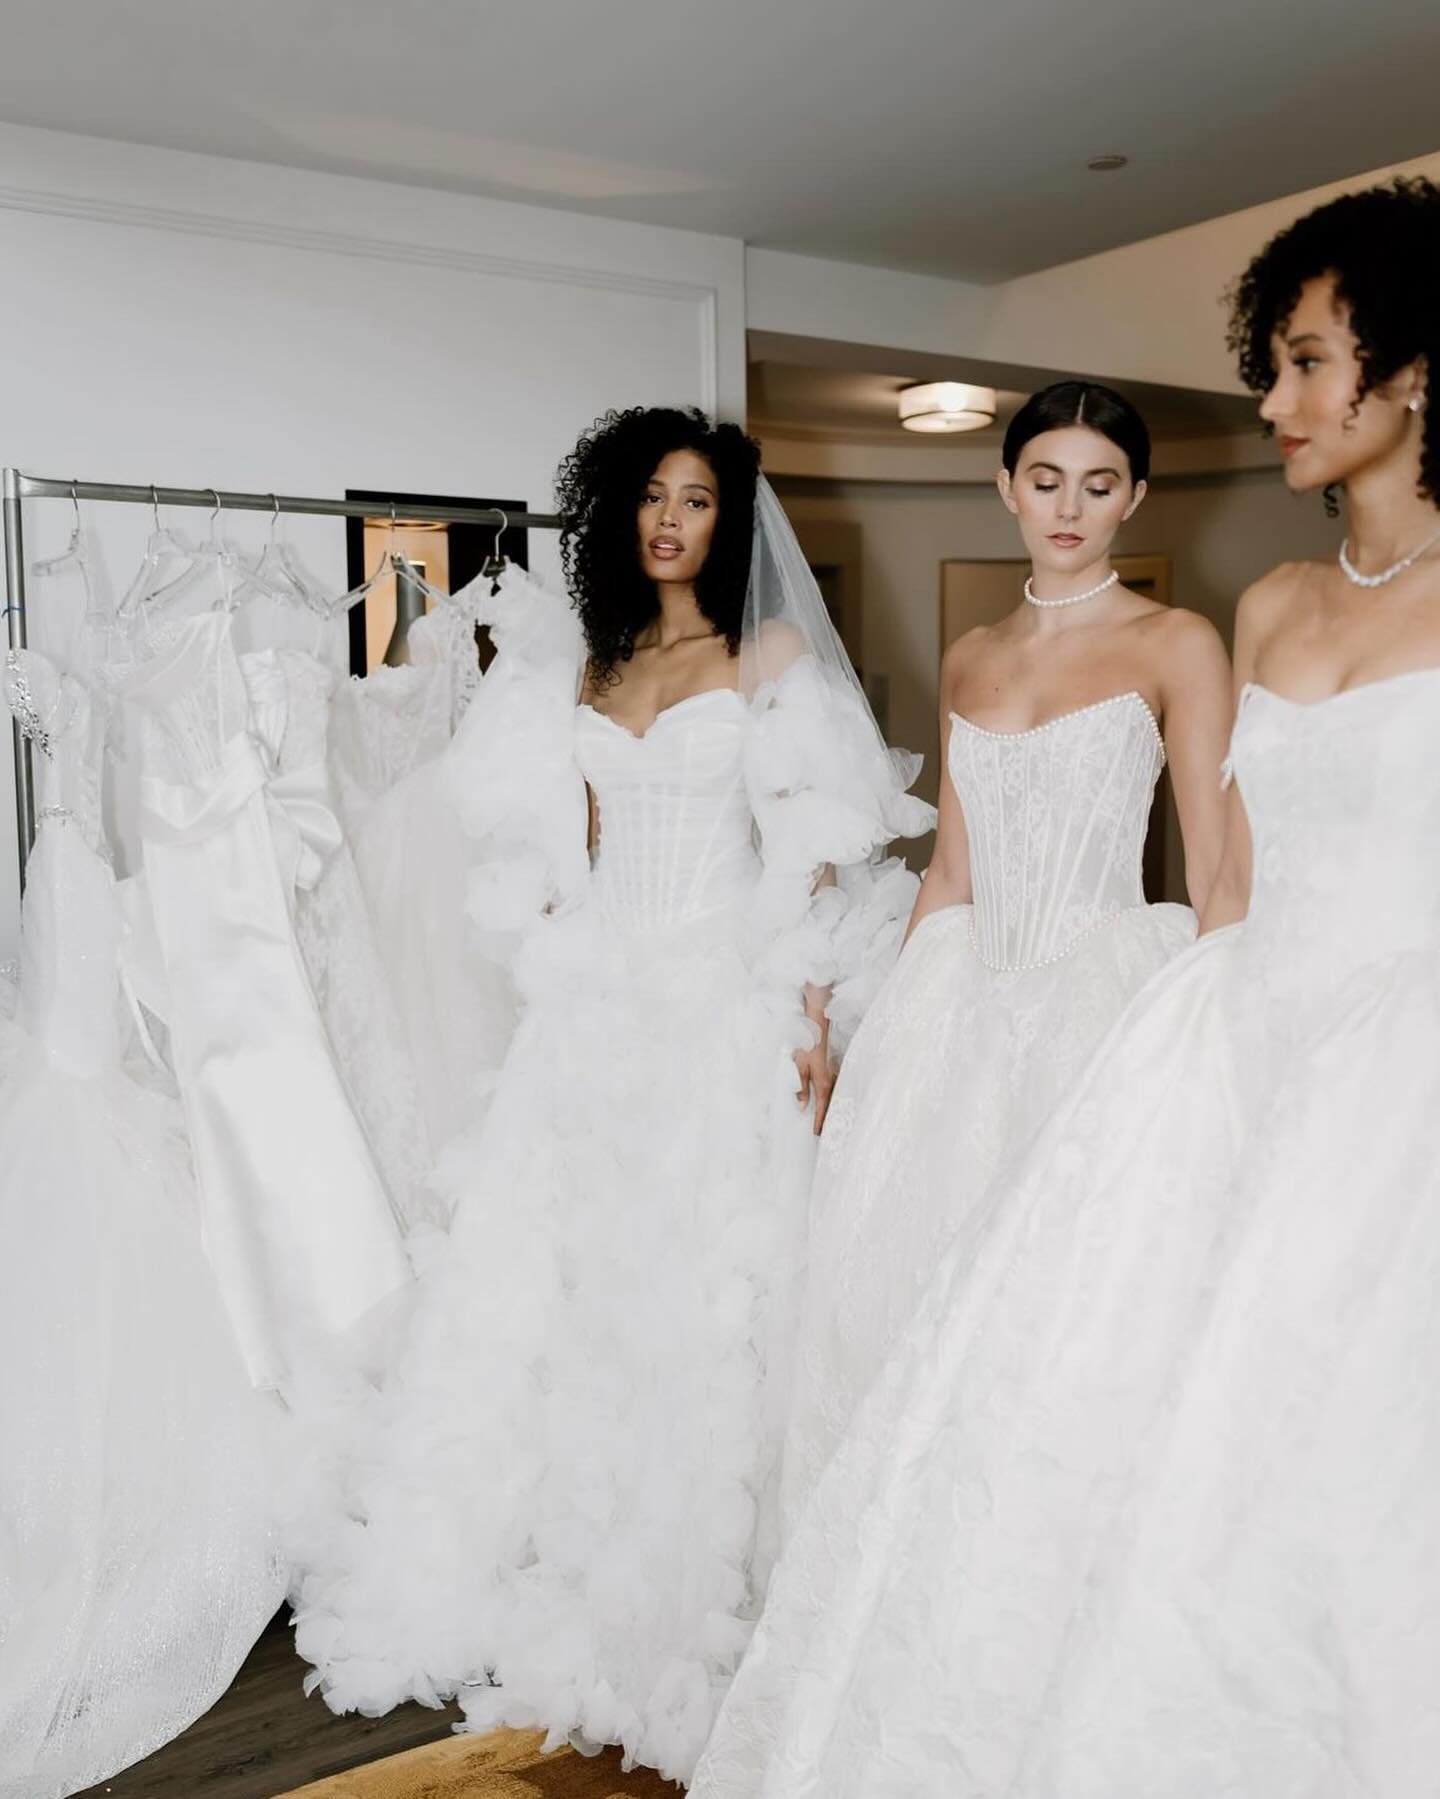 Very excited to announce that our next Trunk Show event will be hosting the new @pninatornai collection! 🥳 The famous Say Yes to the Dress designer, previously only found at Kleinfeld, is now available for our Marie Gabriel brides 👏

@pninatornai T